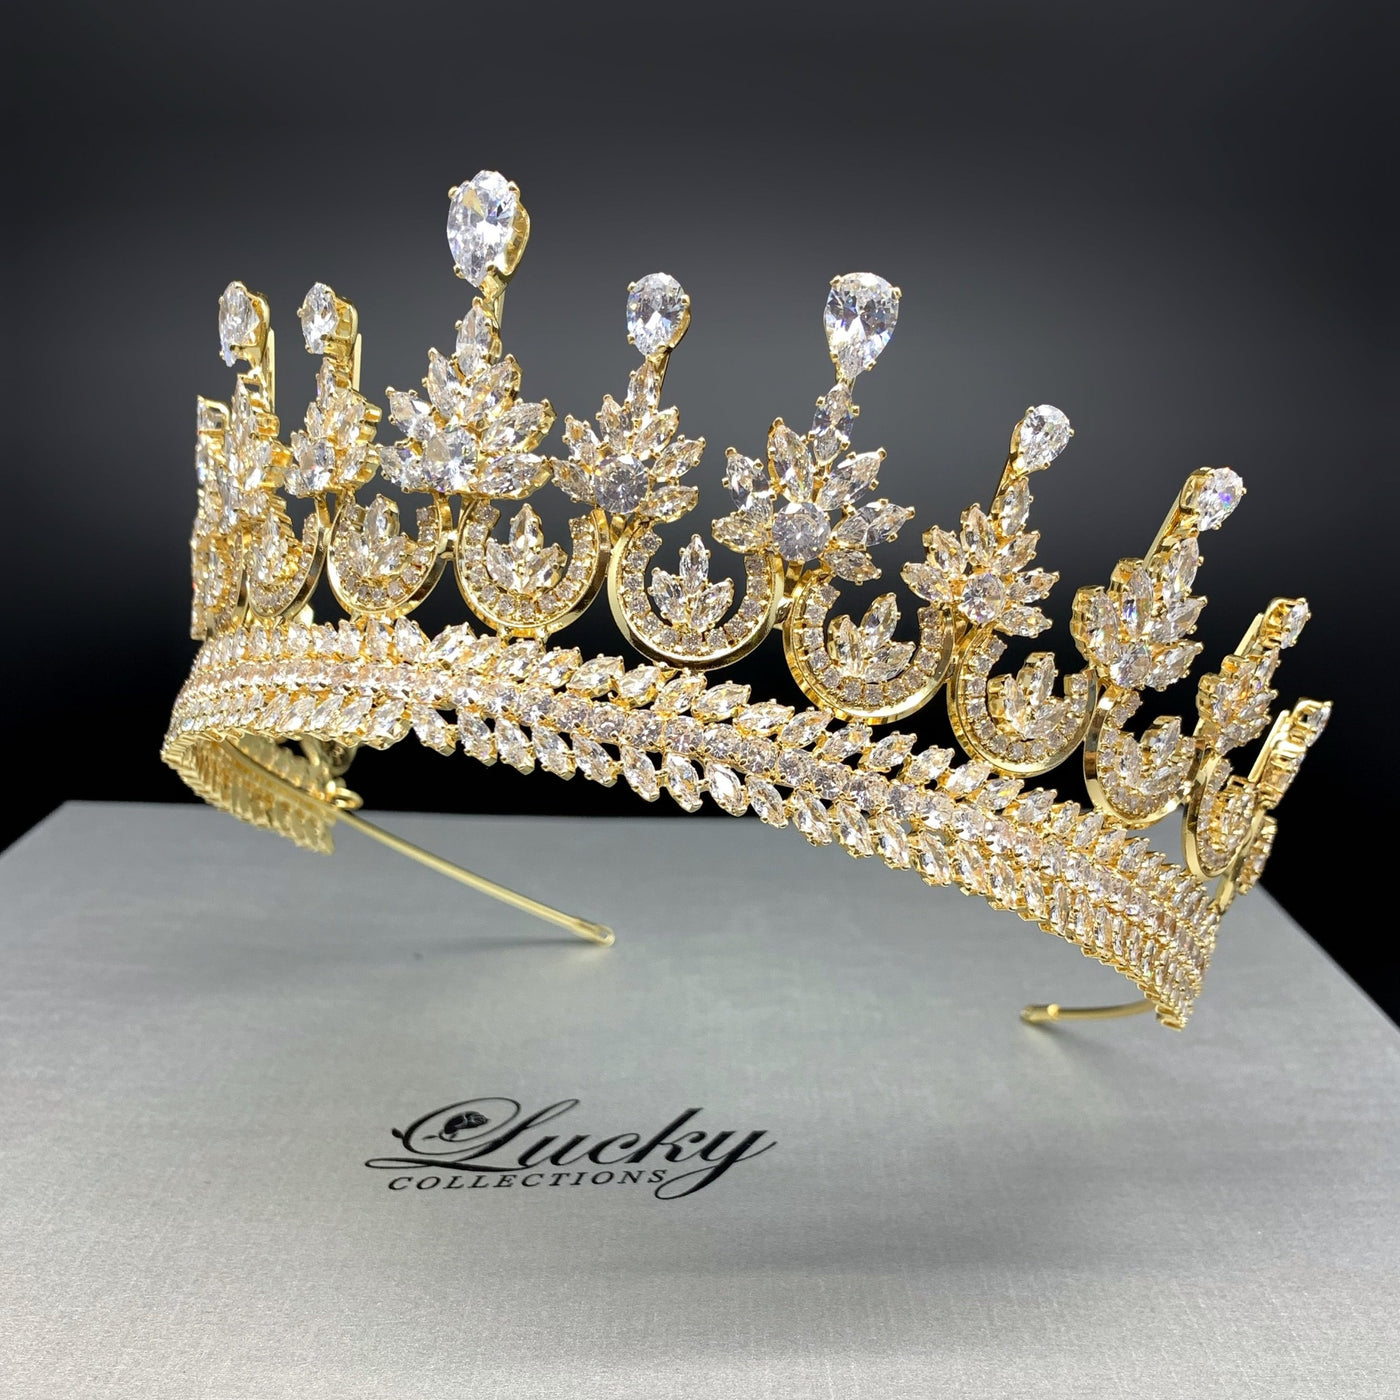  Zirconia Tiara Gold & Silver ideal for all celebrations by Lucky Collections ™